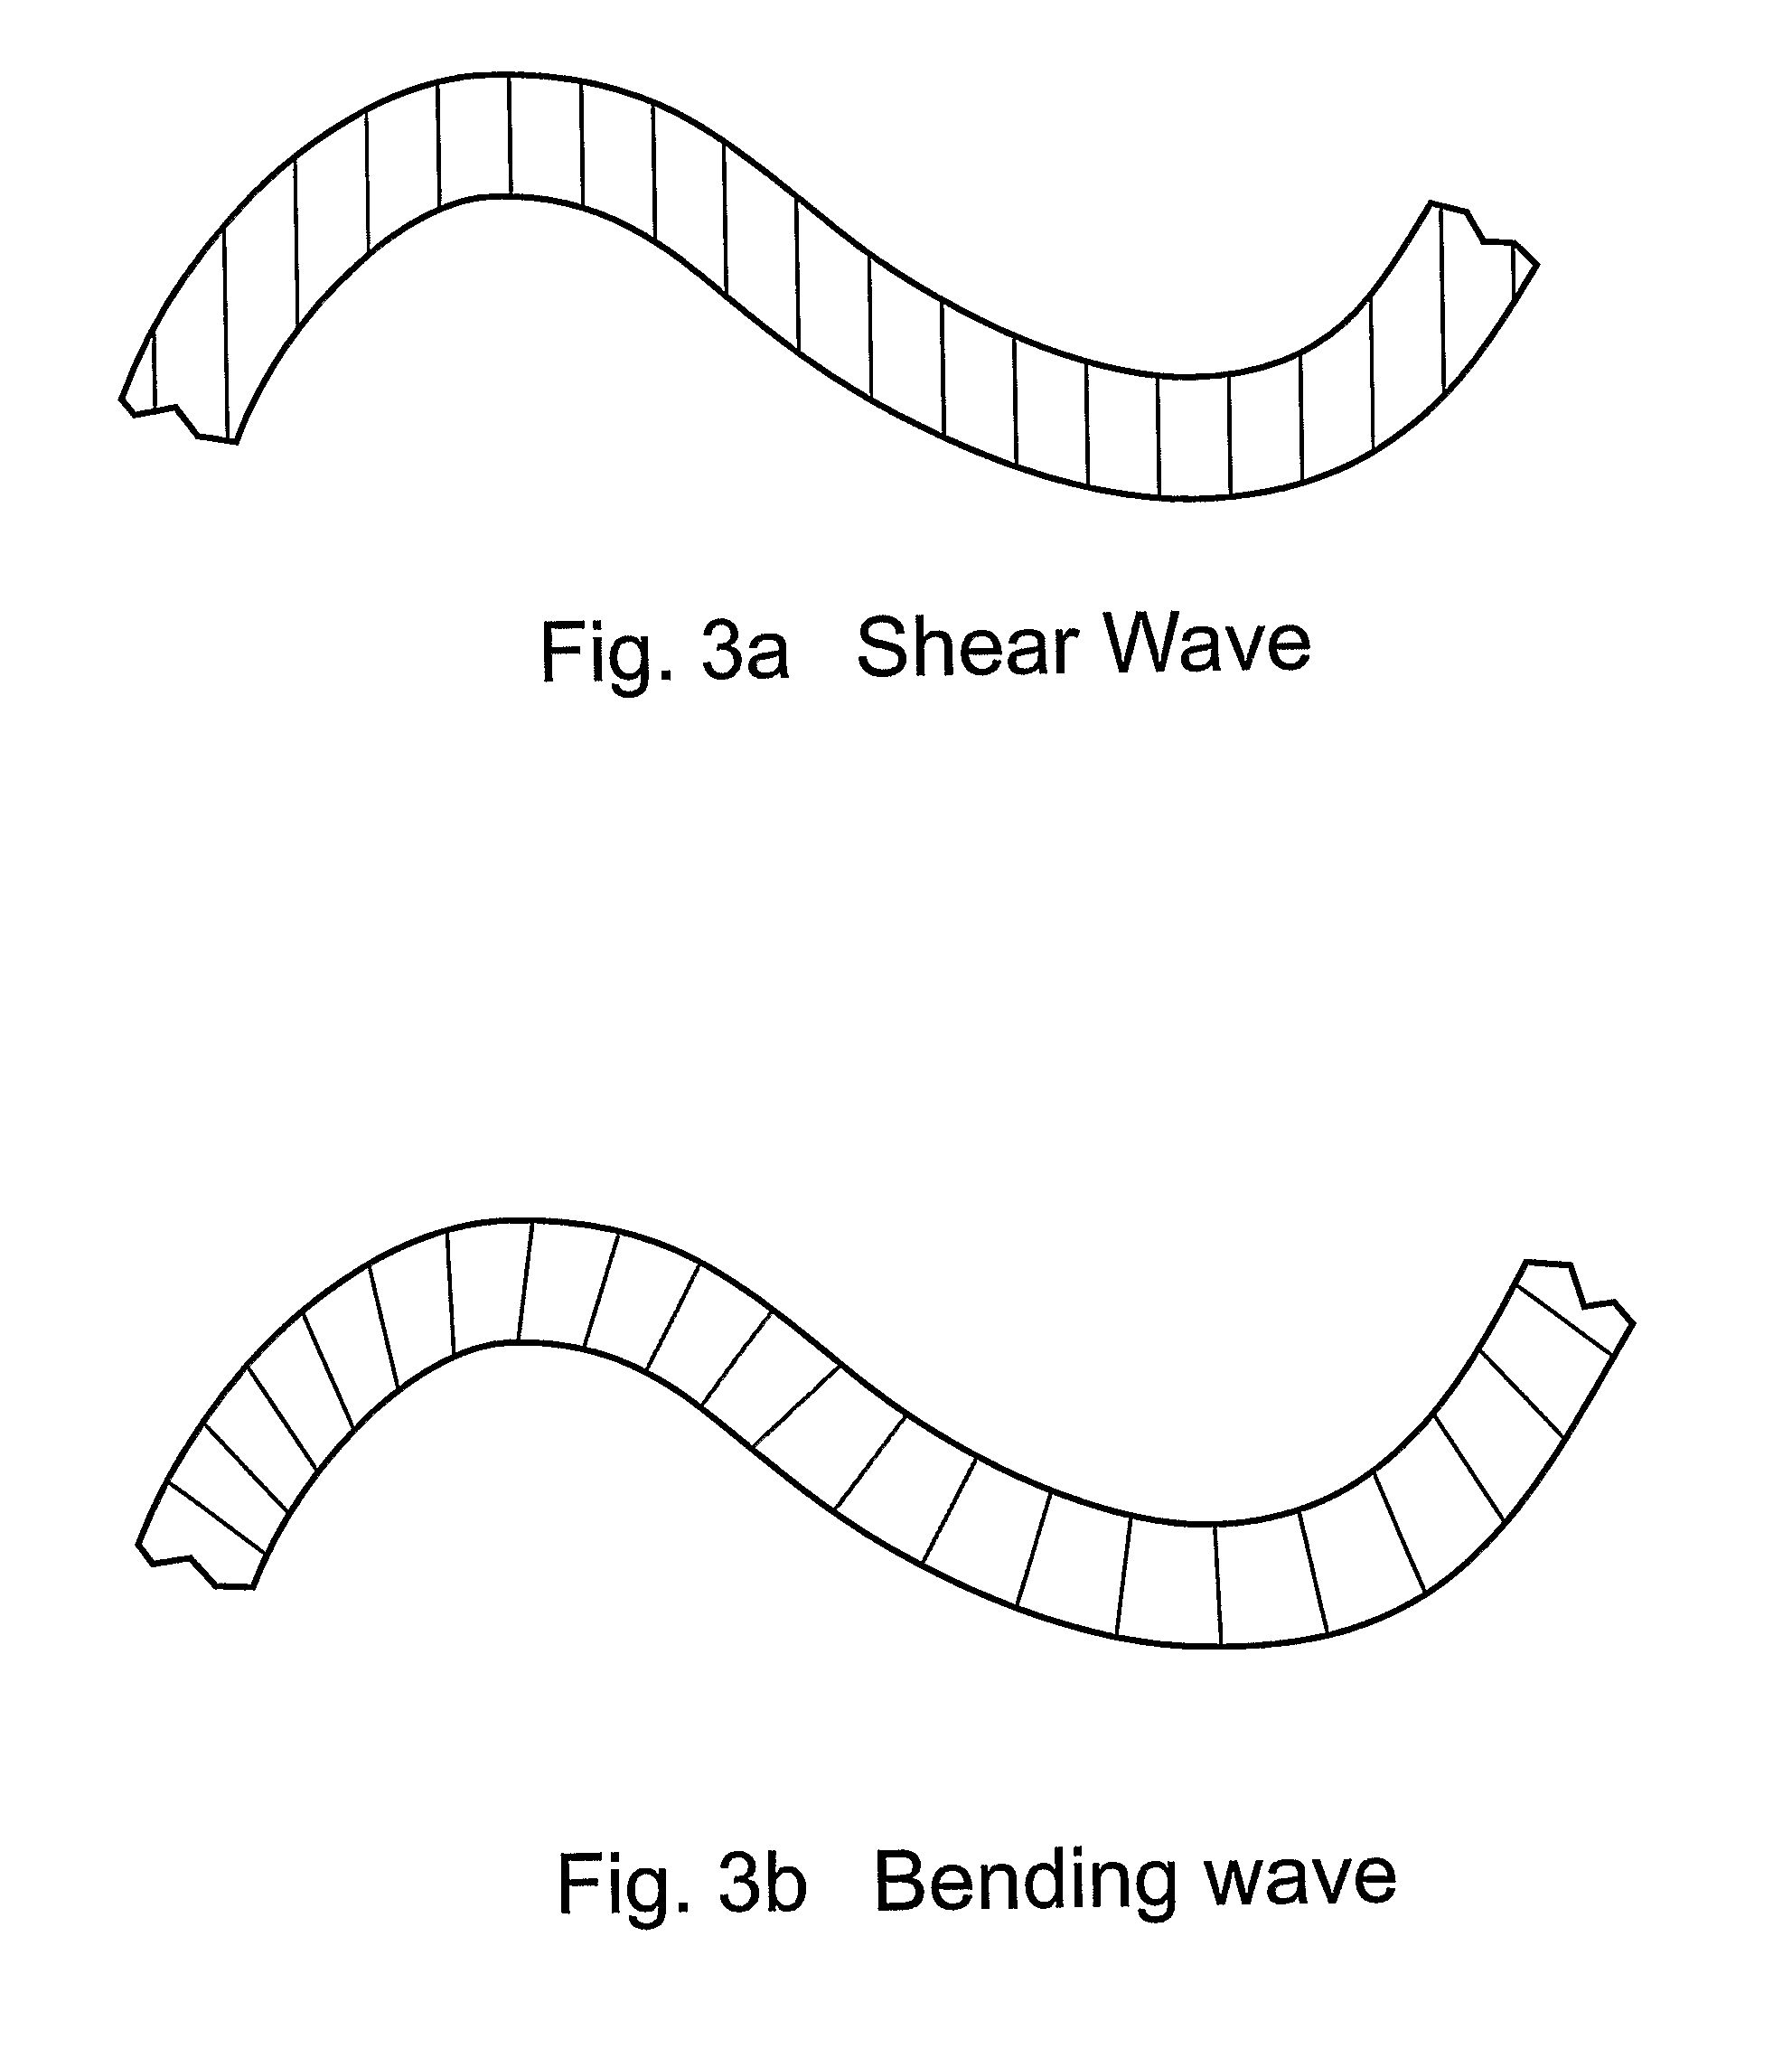 Method and Apparatus for Precisely Measuring Wire Tension and Other Conditions, and High-Sensitivity Vibration Sensor Constructed in Accordance Therewith